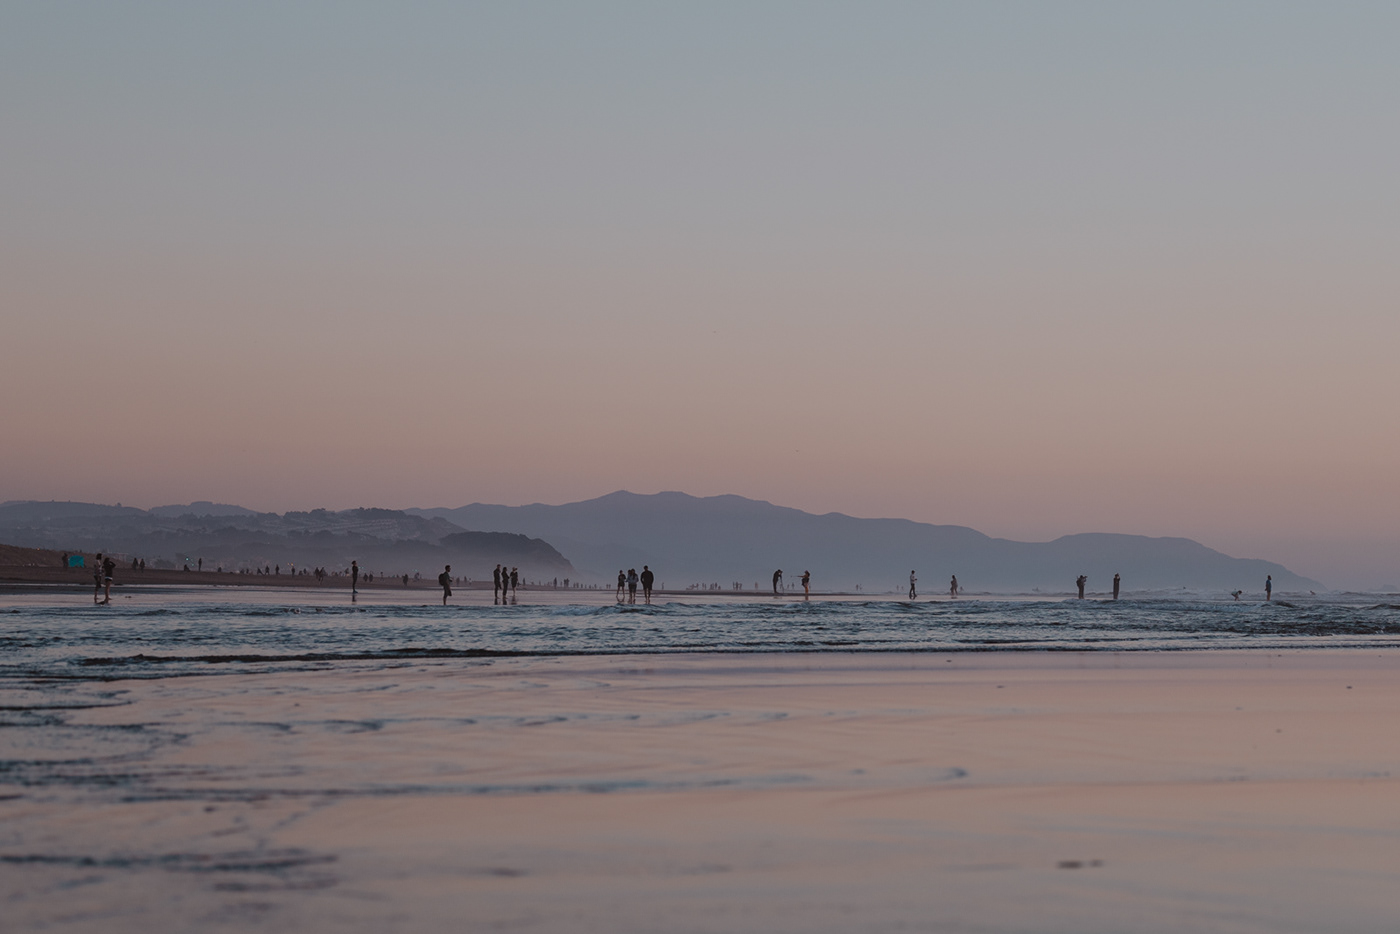 People at the beach (California) by Kathy Gomez Photography